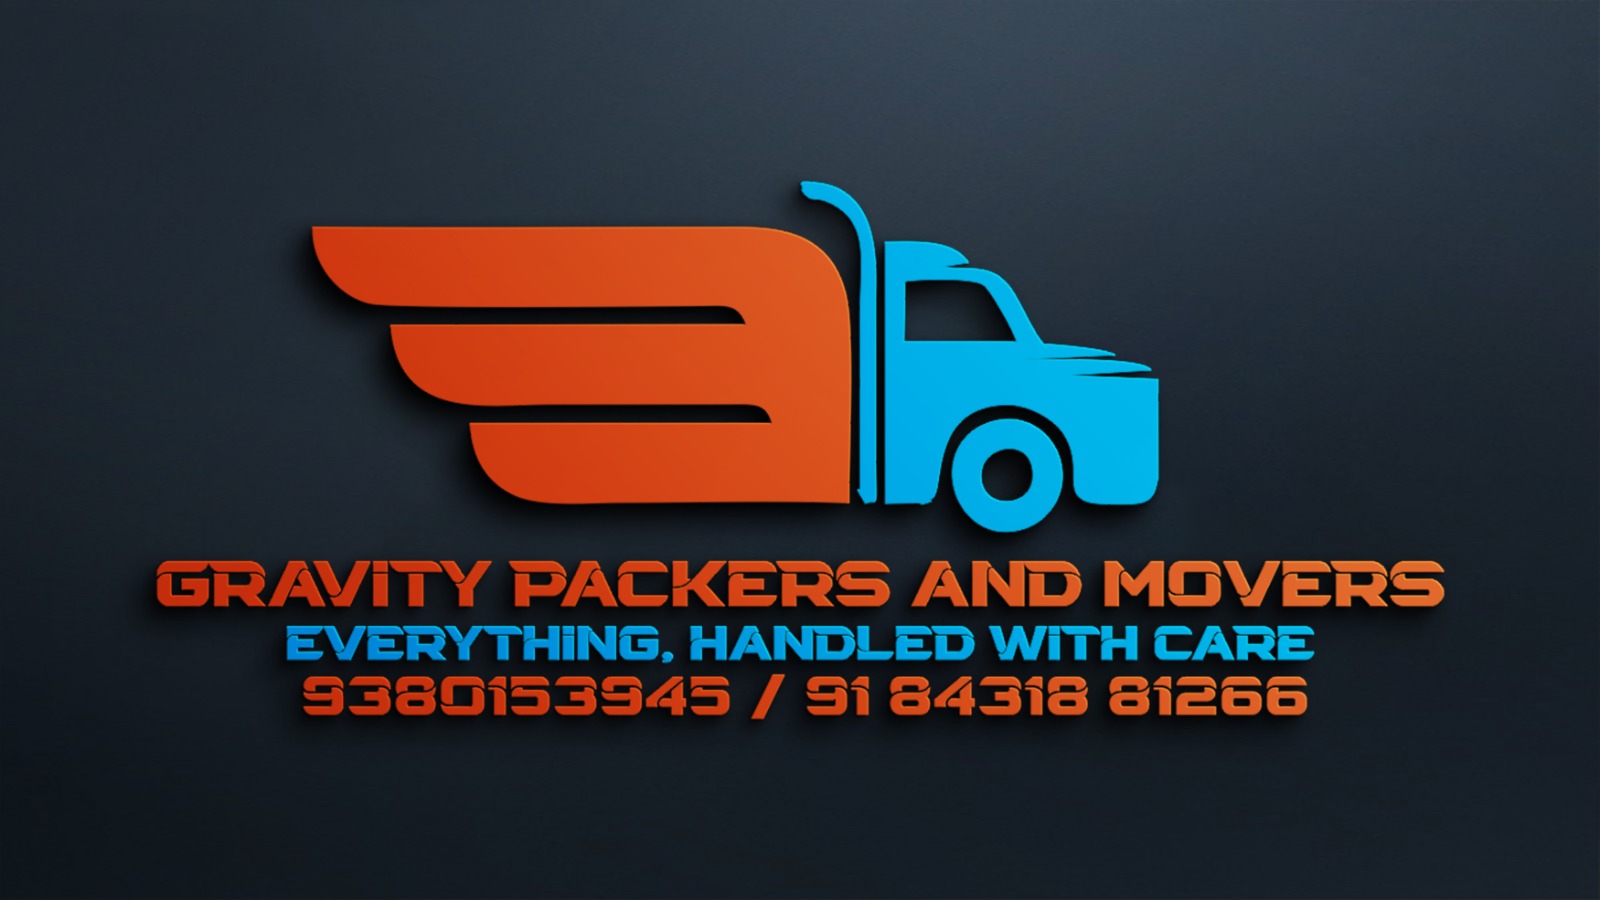 VR Logistics Movers: Relocations, Logistics, Movers And Packers